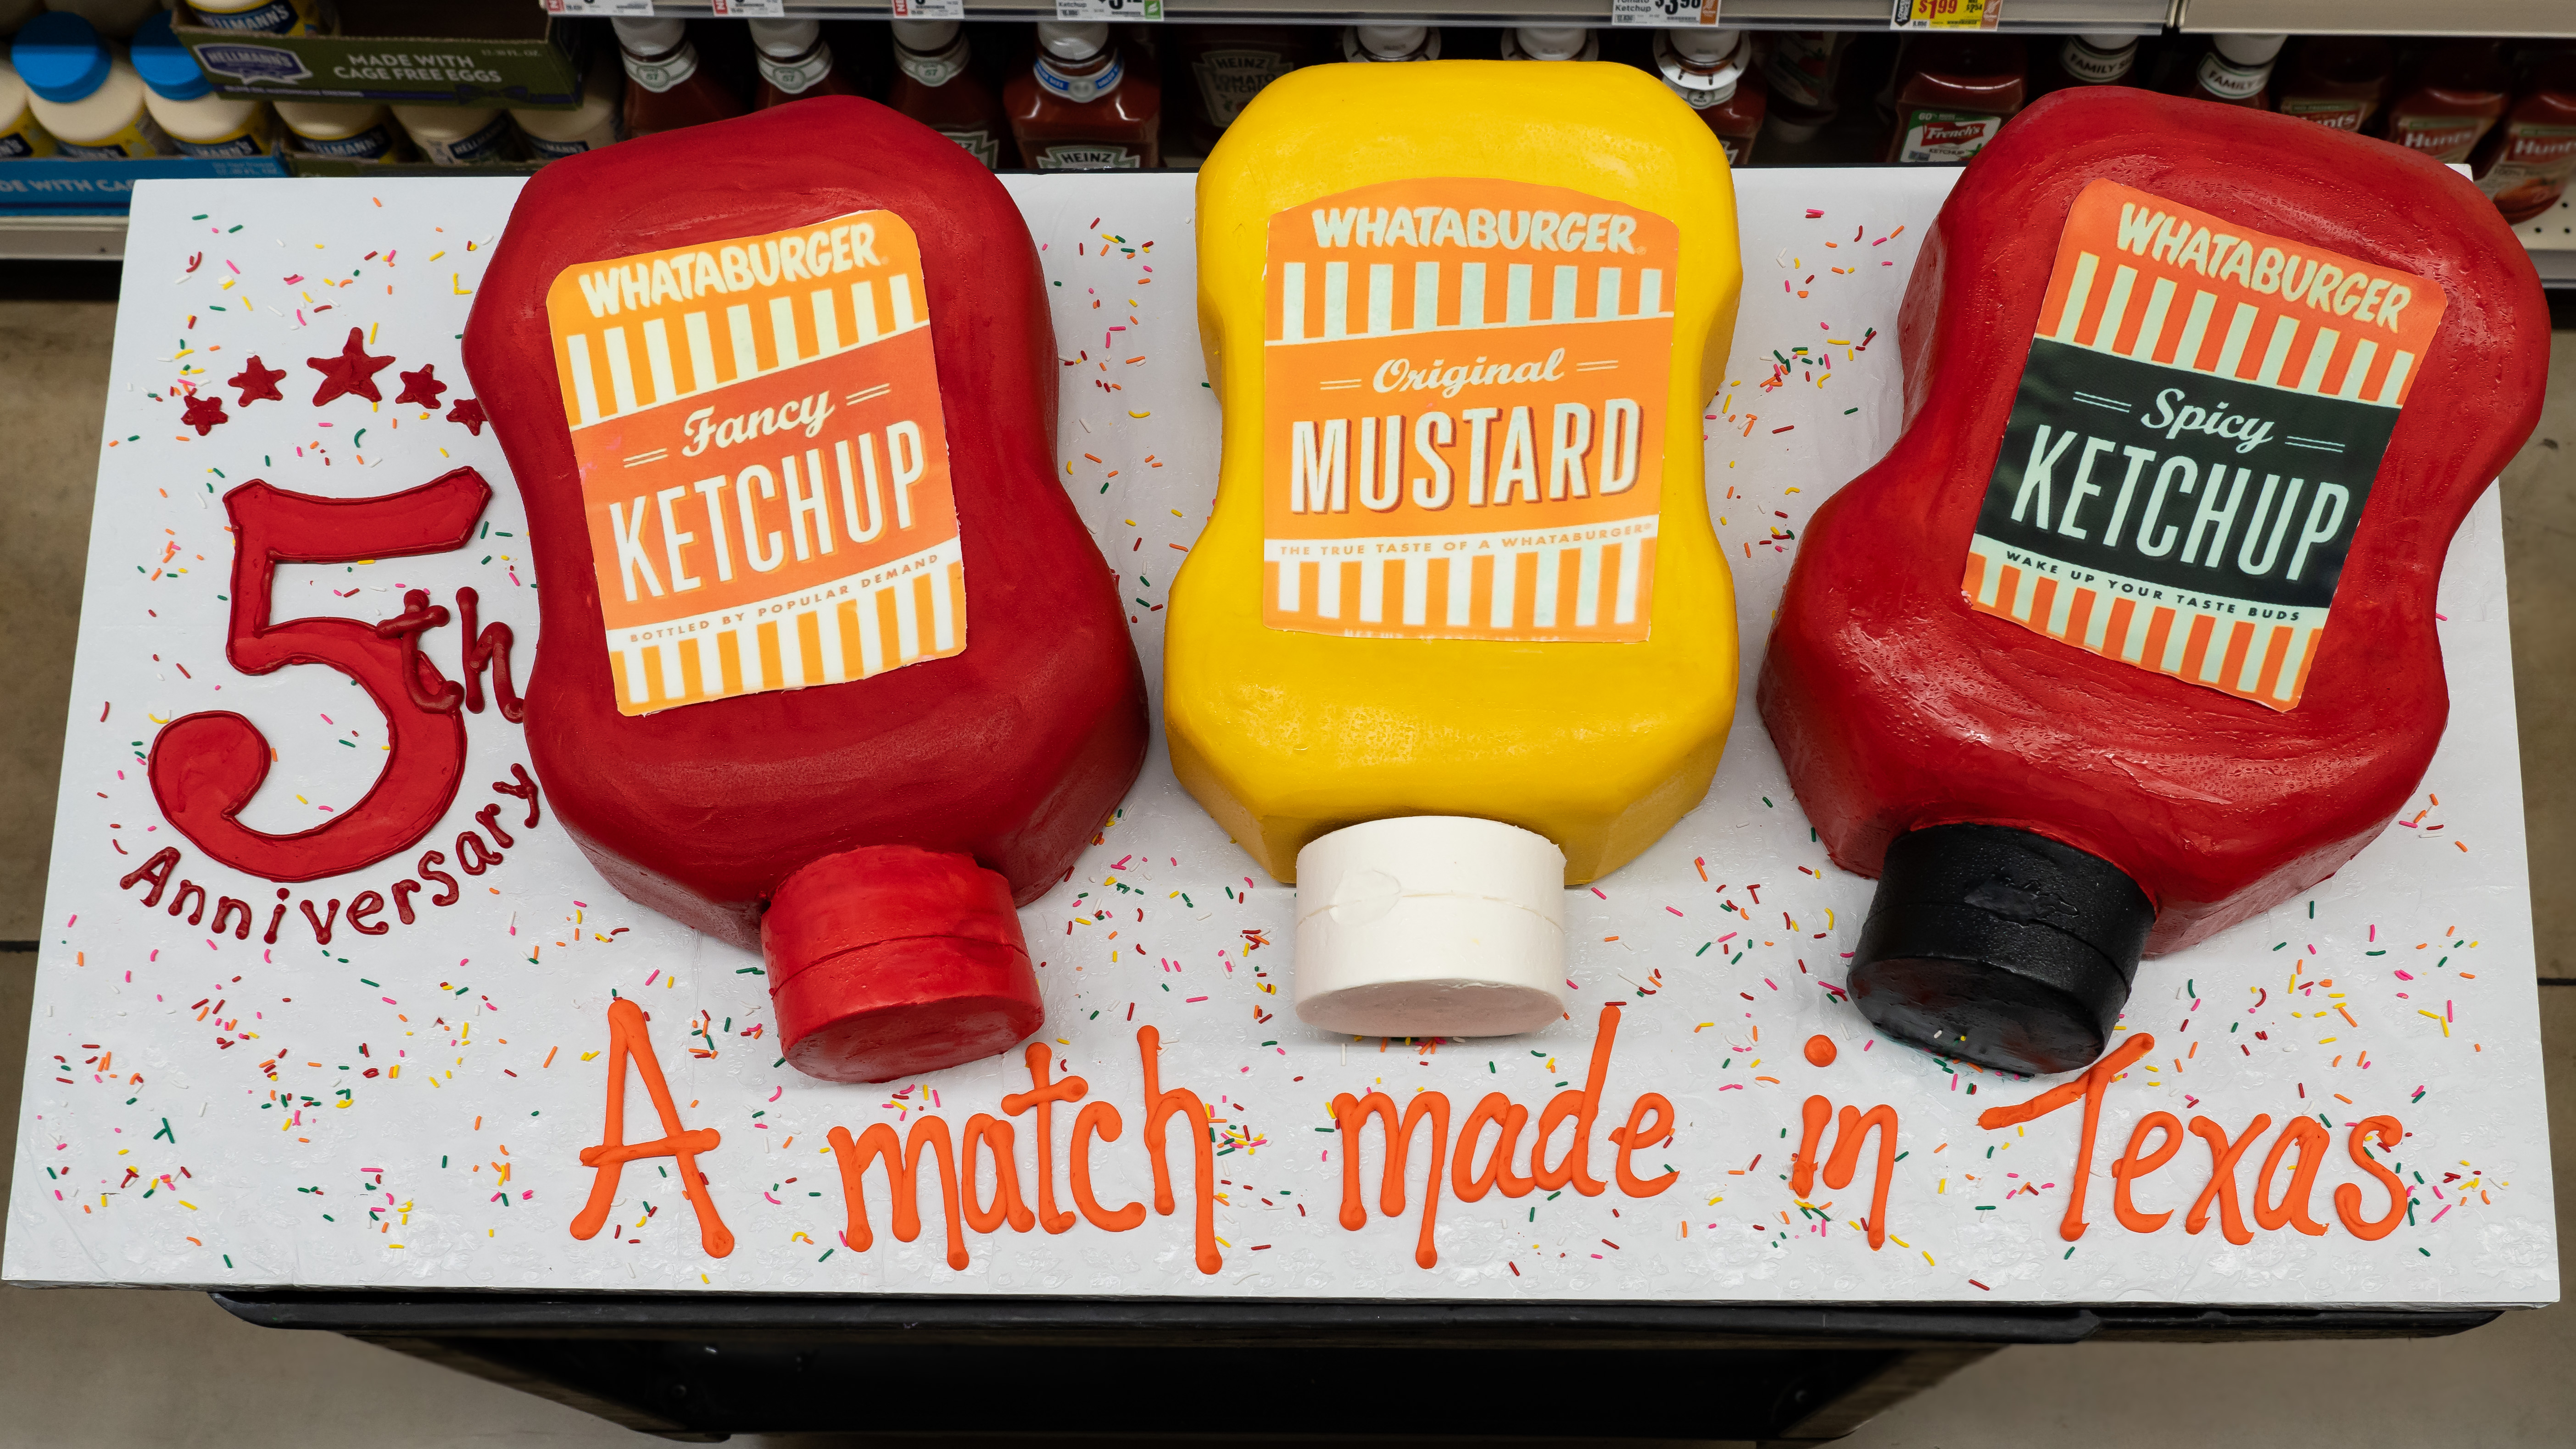 Whataburger Spicy Ketchup, Delivery Near You